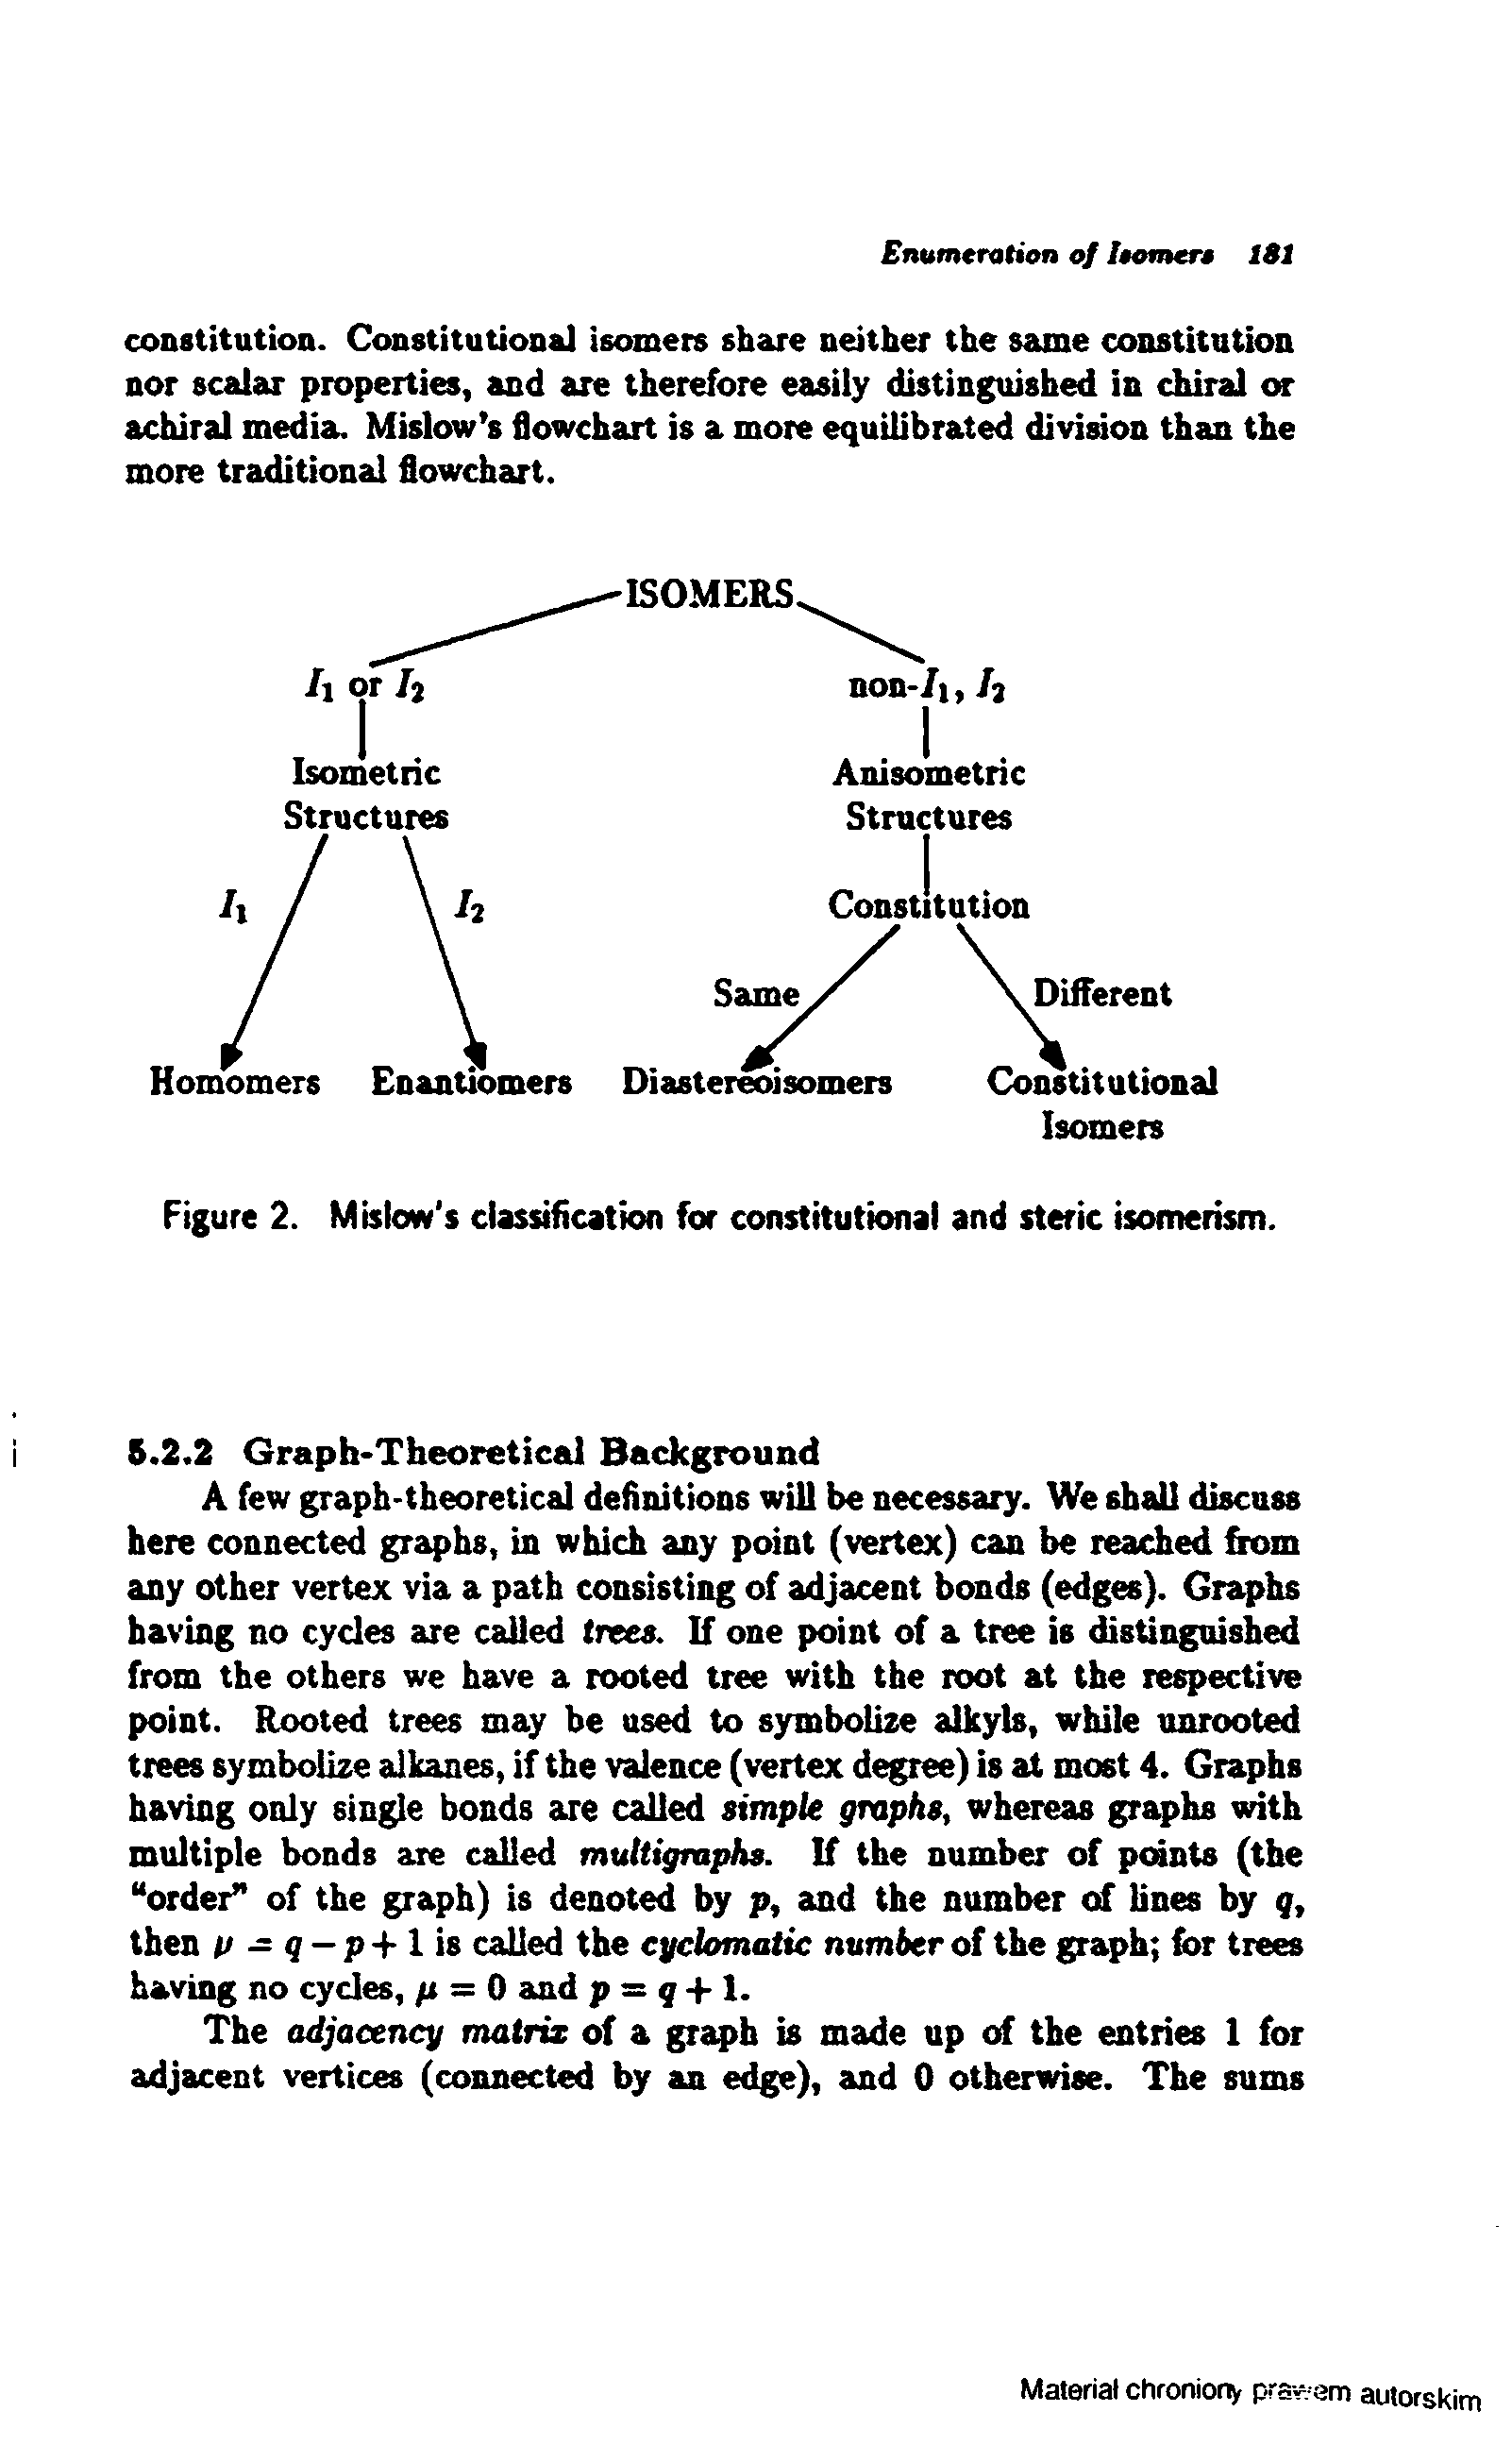 Figure 2. Mislow s classification for constitutionai and steric isomerism.